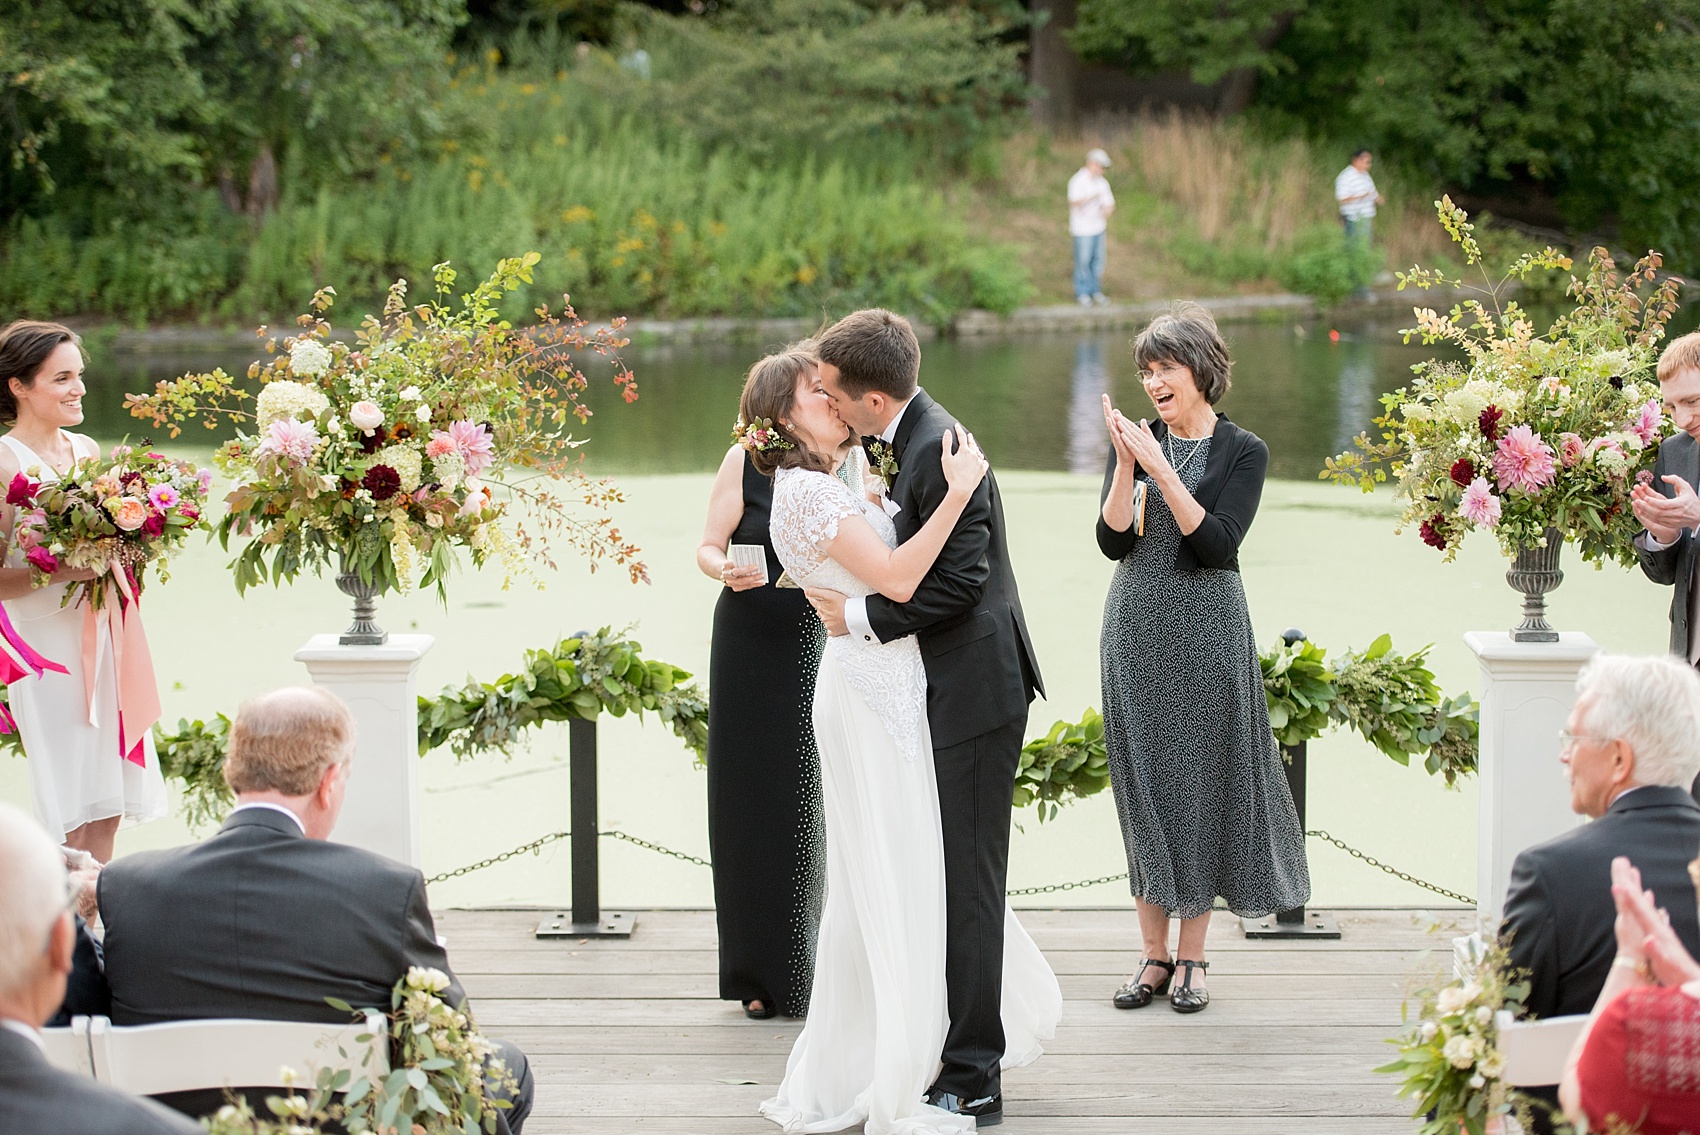 Mikkel Paige Photography photo of an outdoor ceremony at a Prospect Park Boathouse wedding.